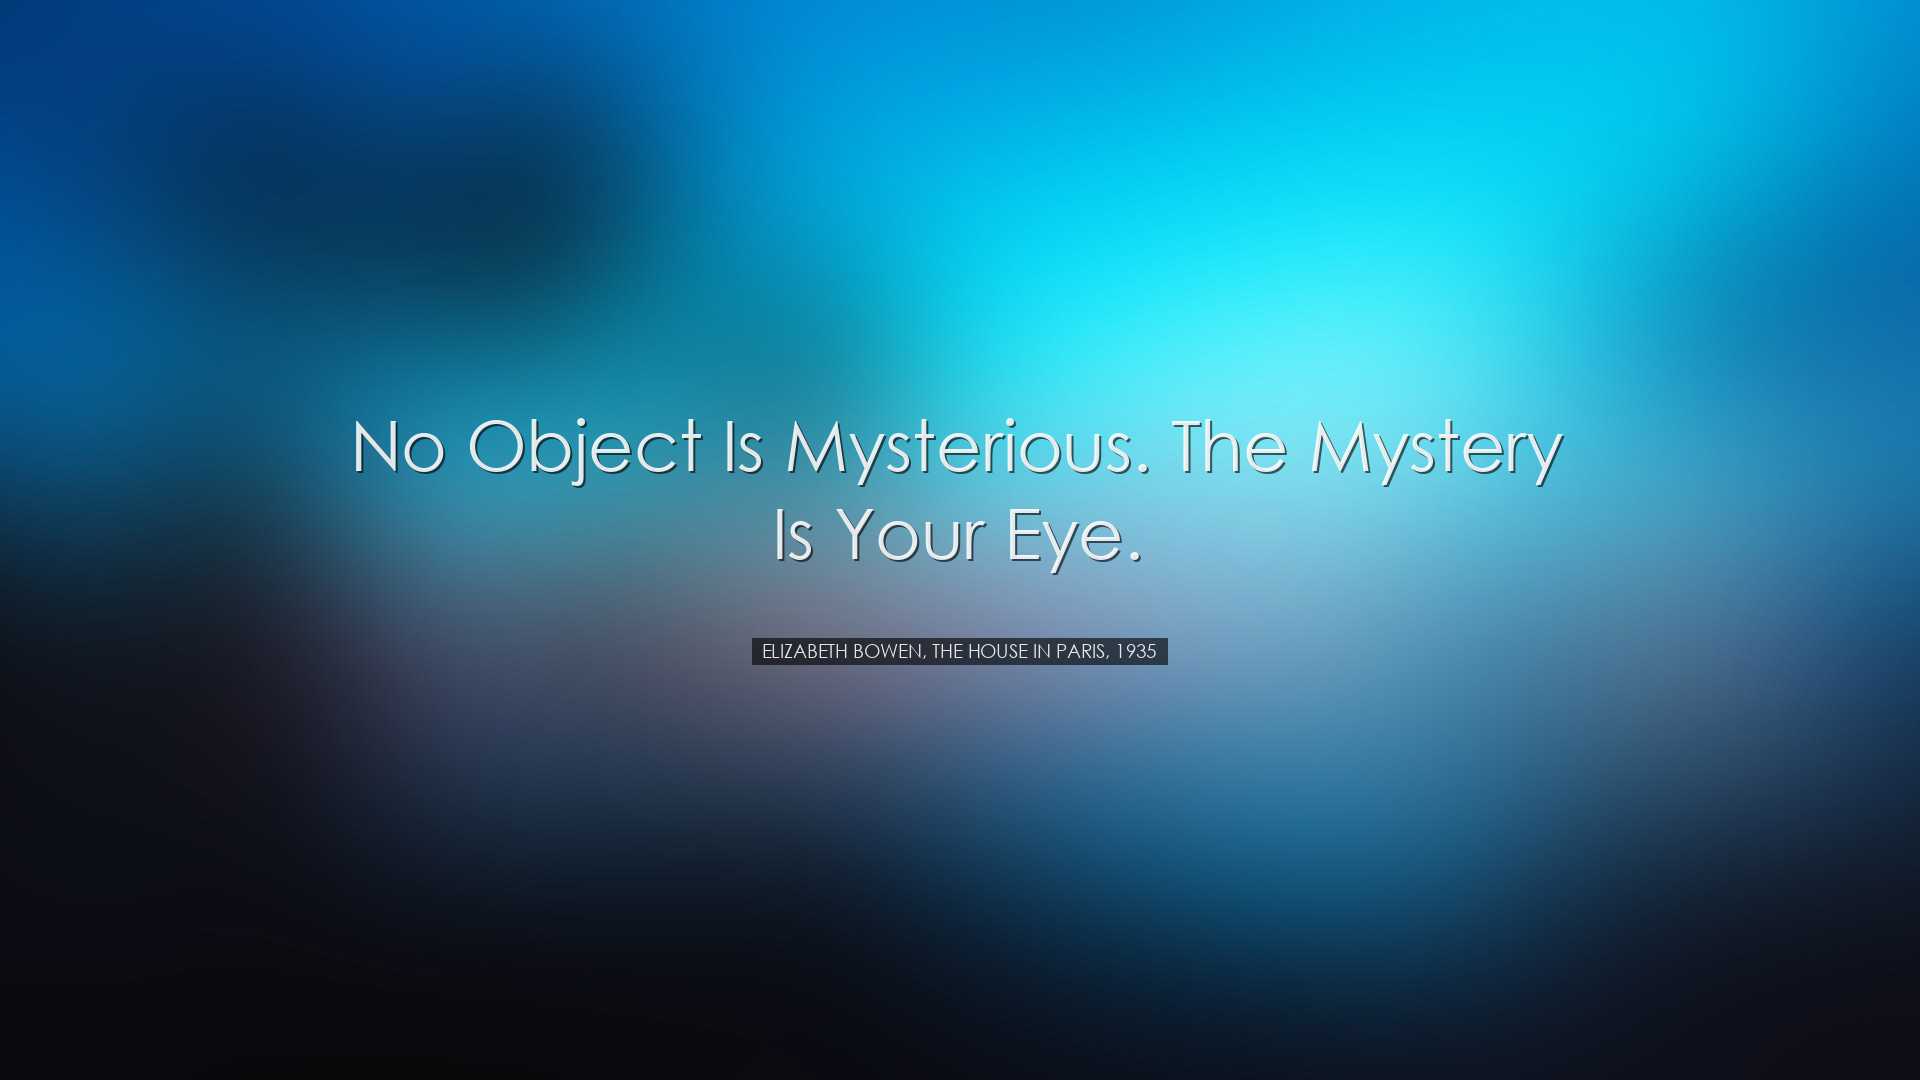 No object is mysterious. The mystery is your eye. - Elizabeth Bowe